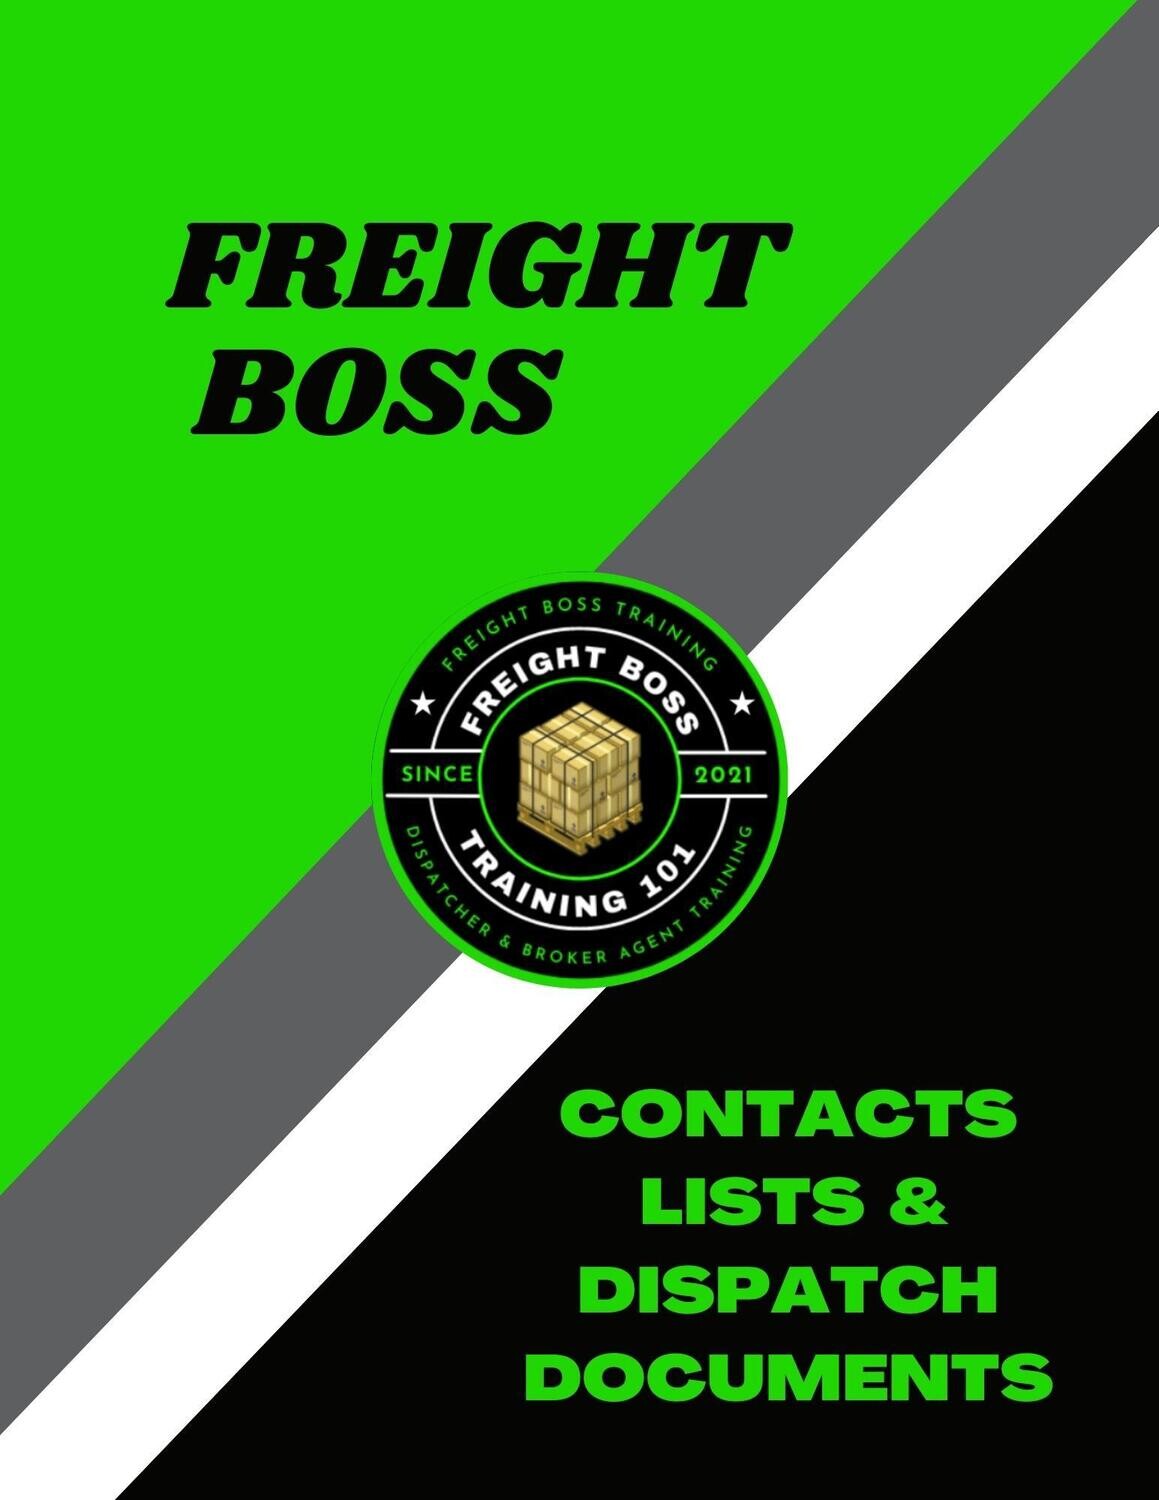 Freight Boss Contact Lists & Dispatch Documents